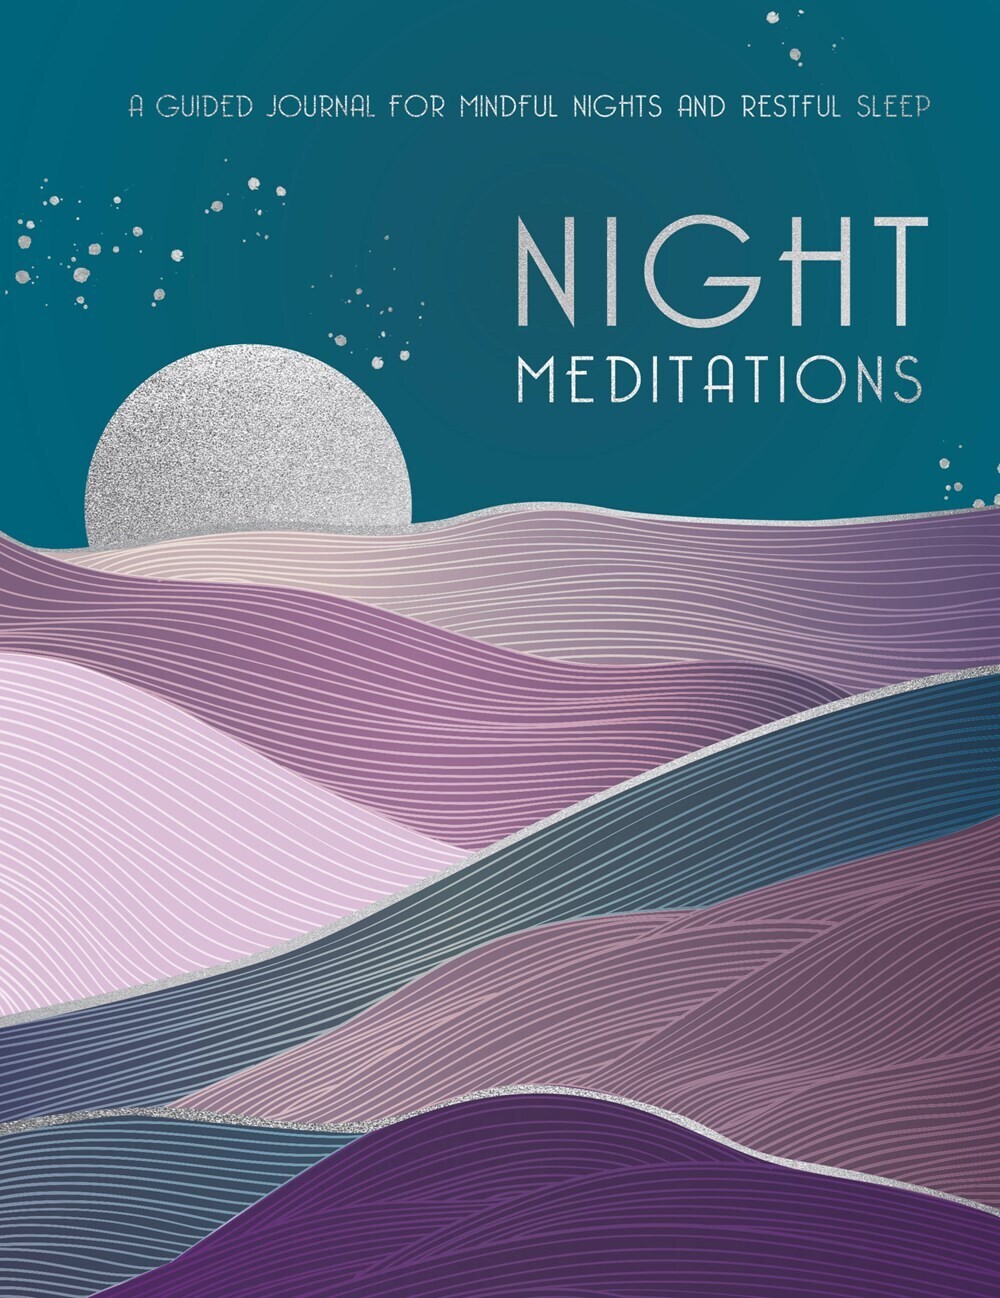 Night Meditations: A Guided Journal for Mindful Nights and Restful Sleep Details 